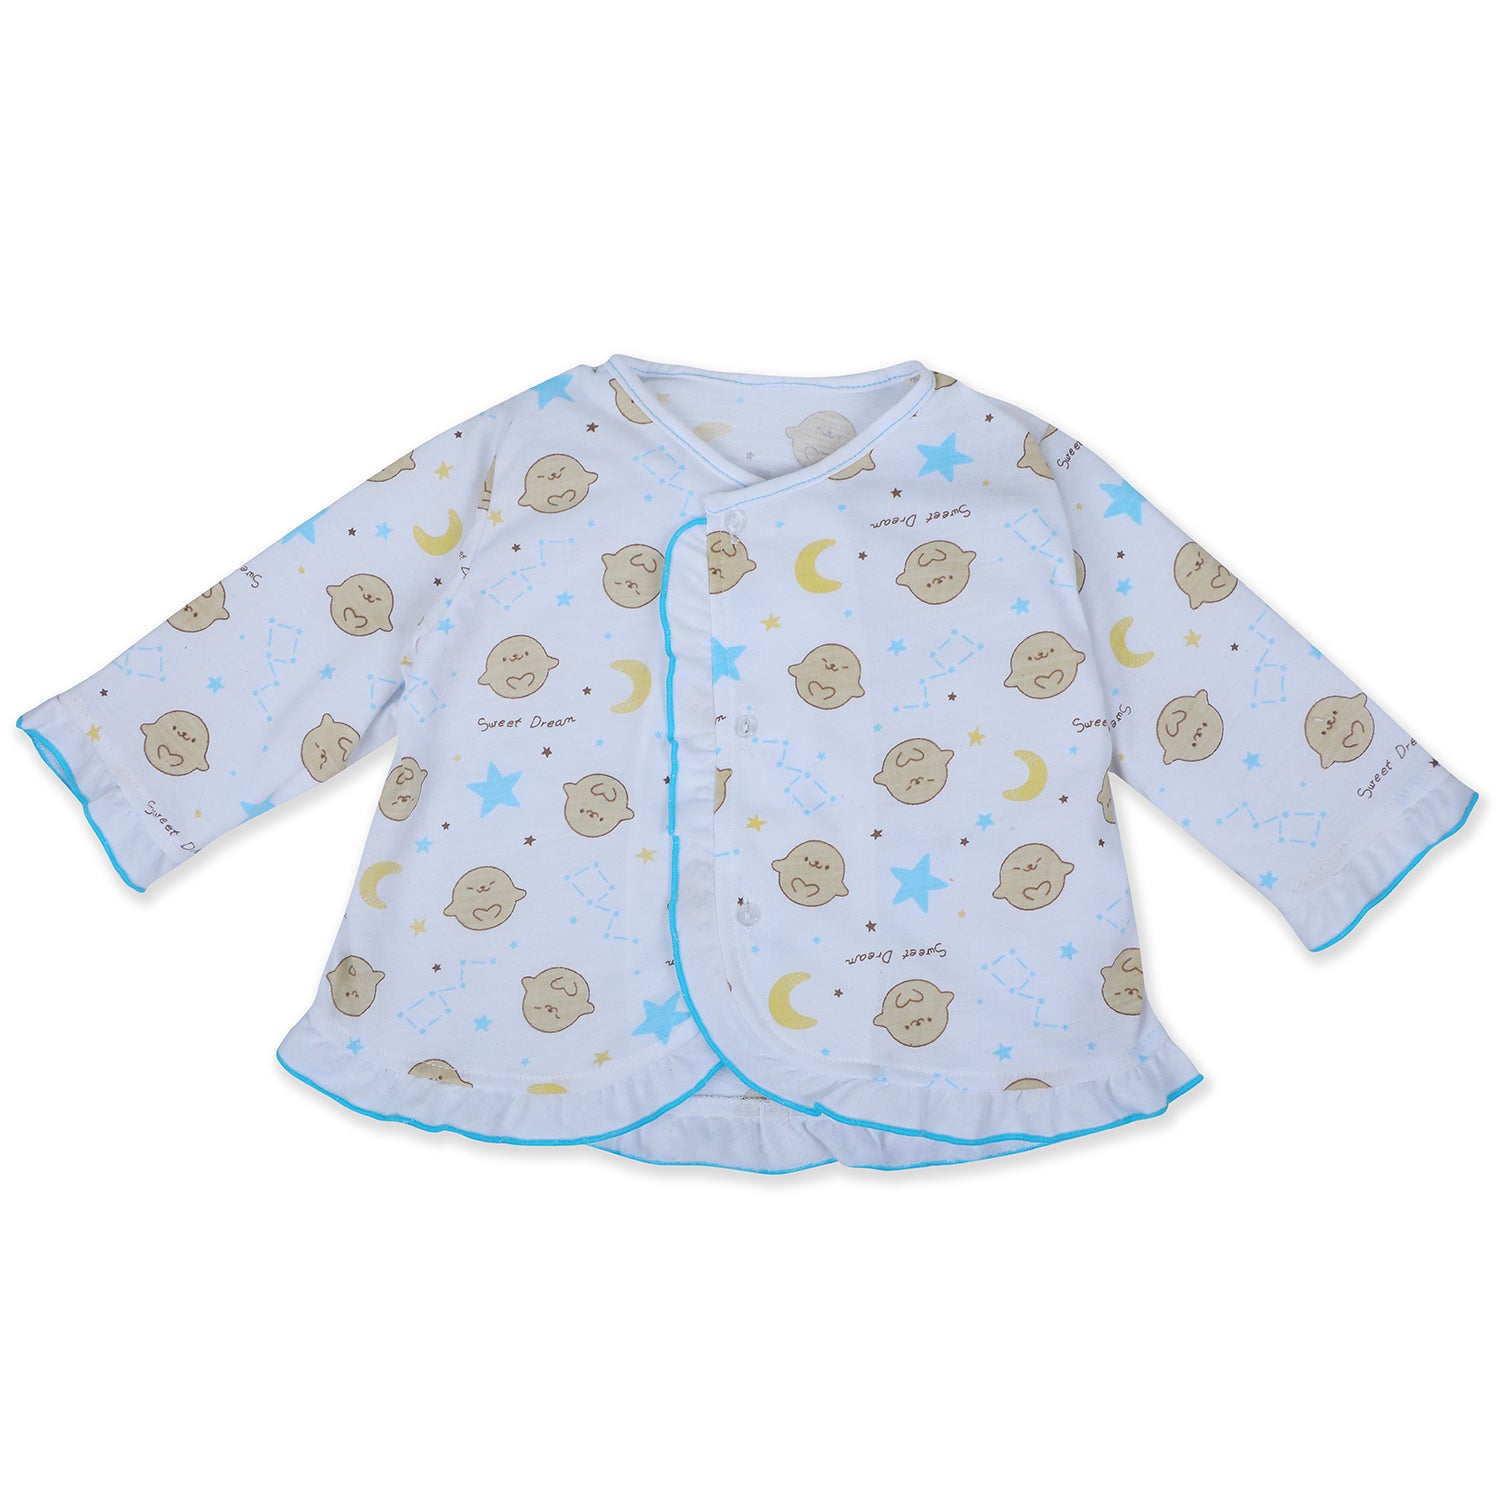 Baby Moo Sweet Dreams Cotton Full Sleeves Top And Pyjama 2pcs Night Suit - Blue - Baby Moo